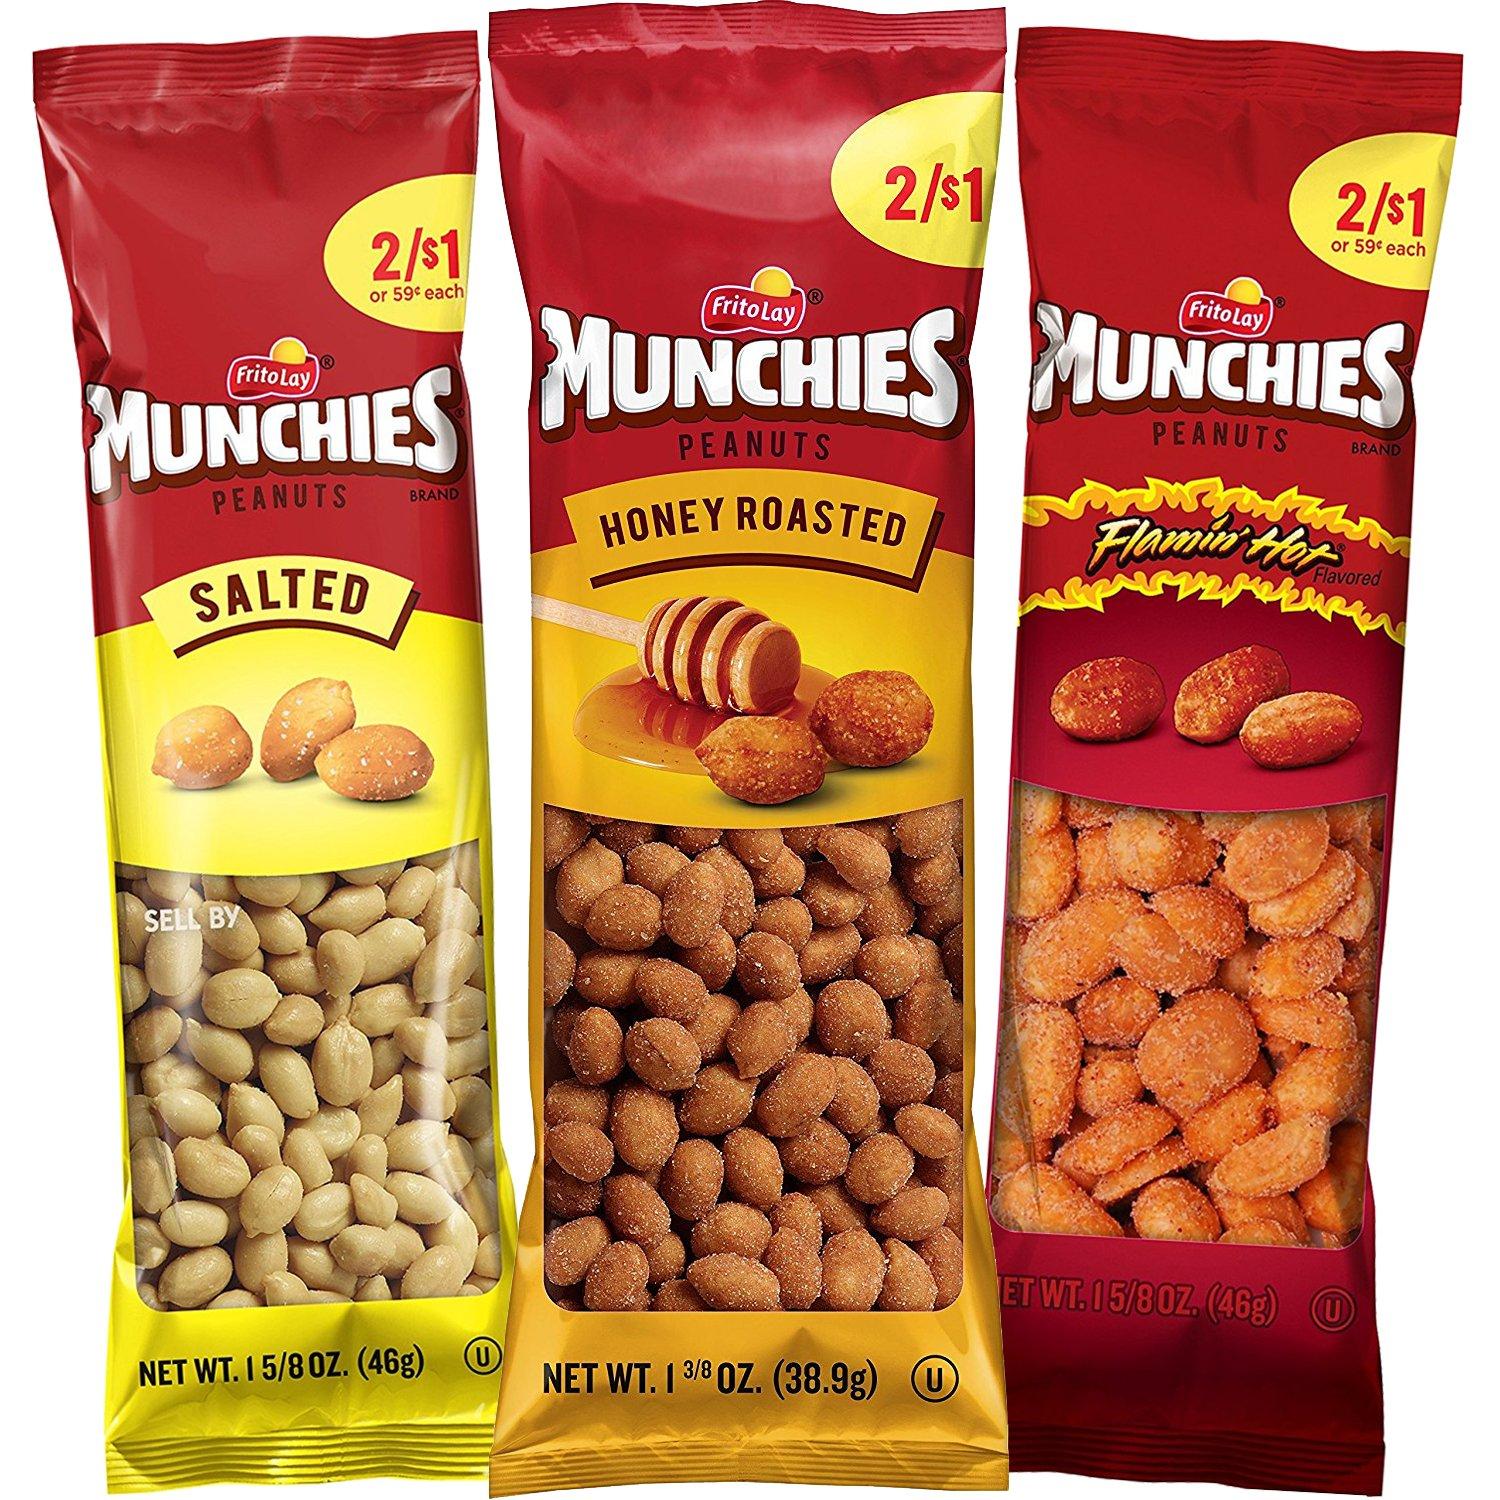 36 Munchies Peanut Variety Pack for $11.24